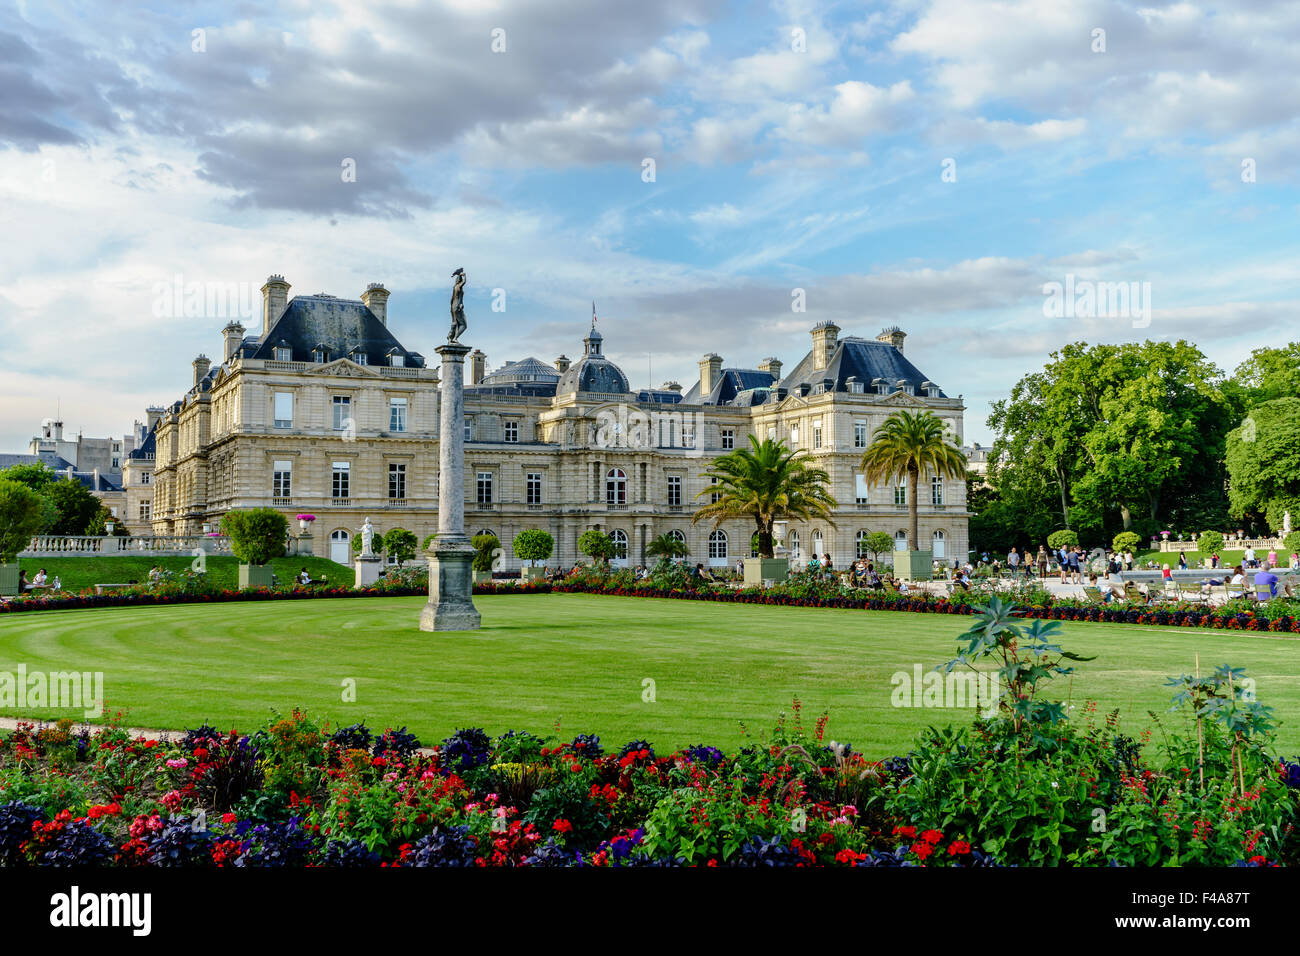 Looking past the garden flowers of the Luxembourg Gardens to the French Senate palace building. July, 2015. Paris, France. Stock Photo